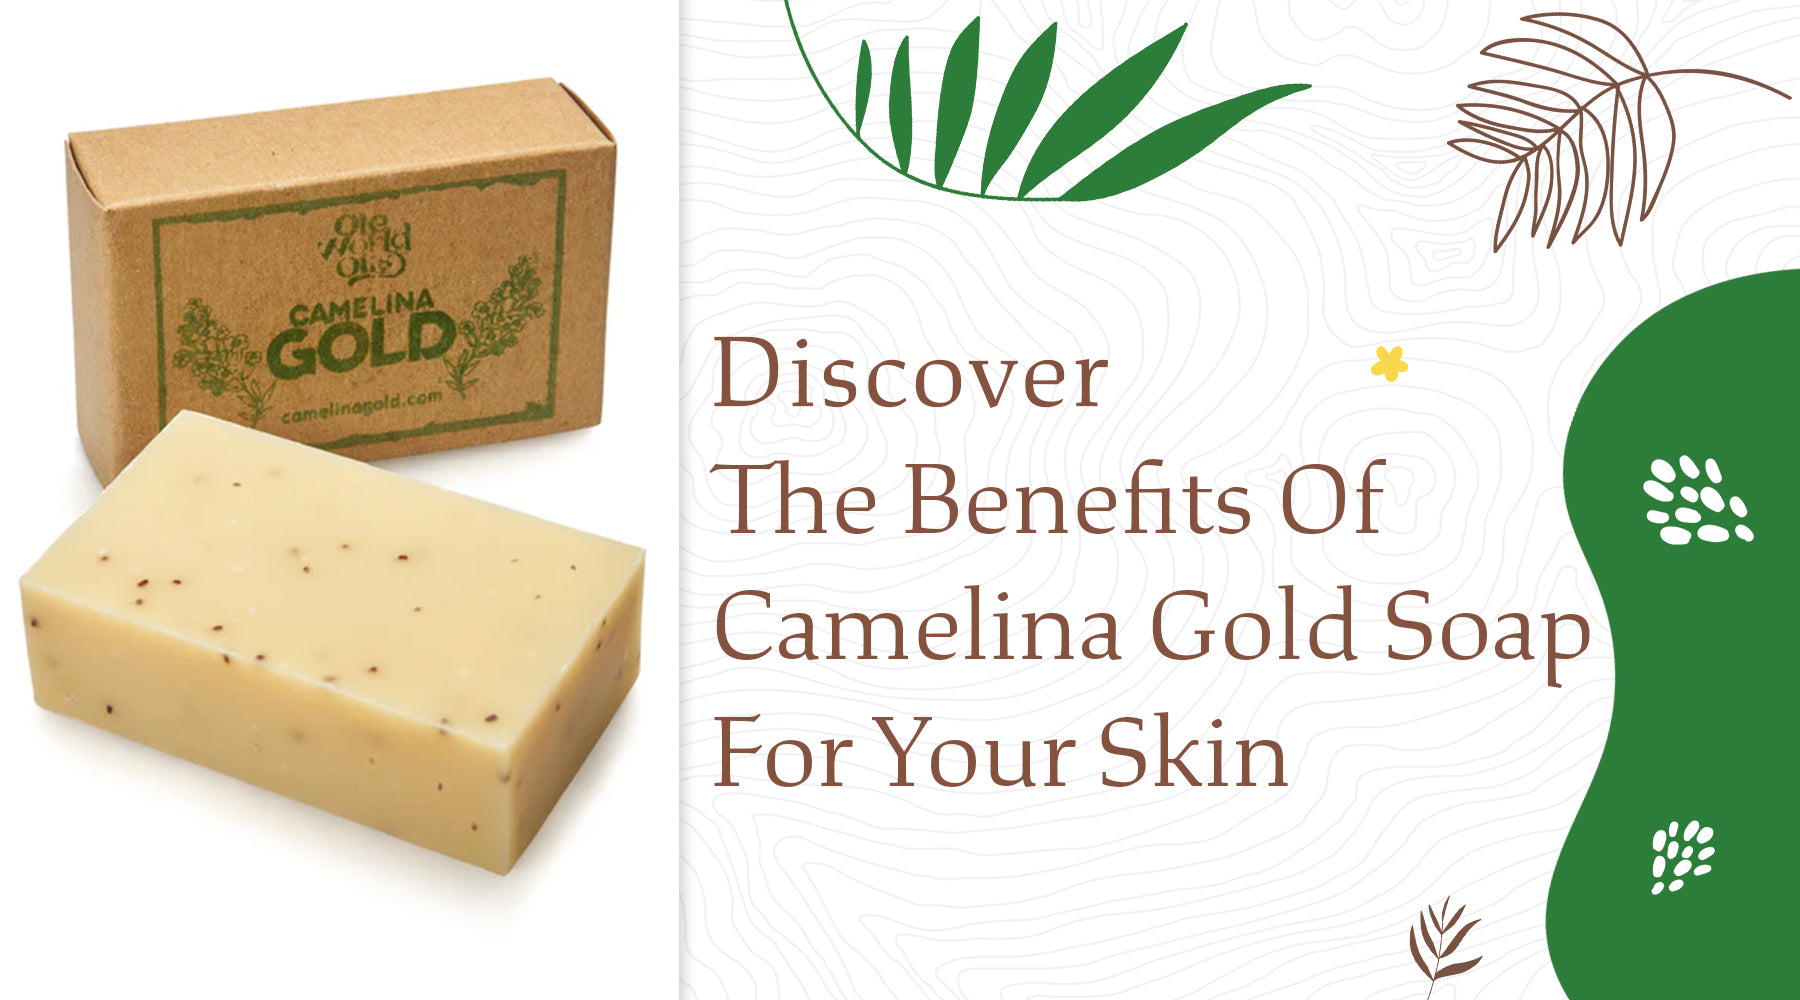 Discover the Benefits of Camelina Gold Soap for Your Skin